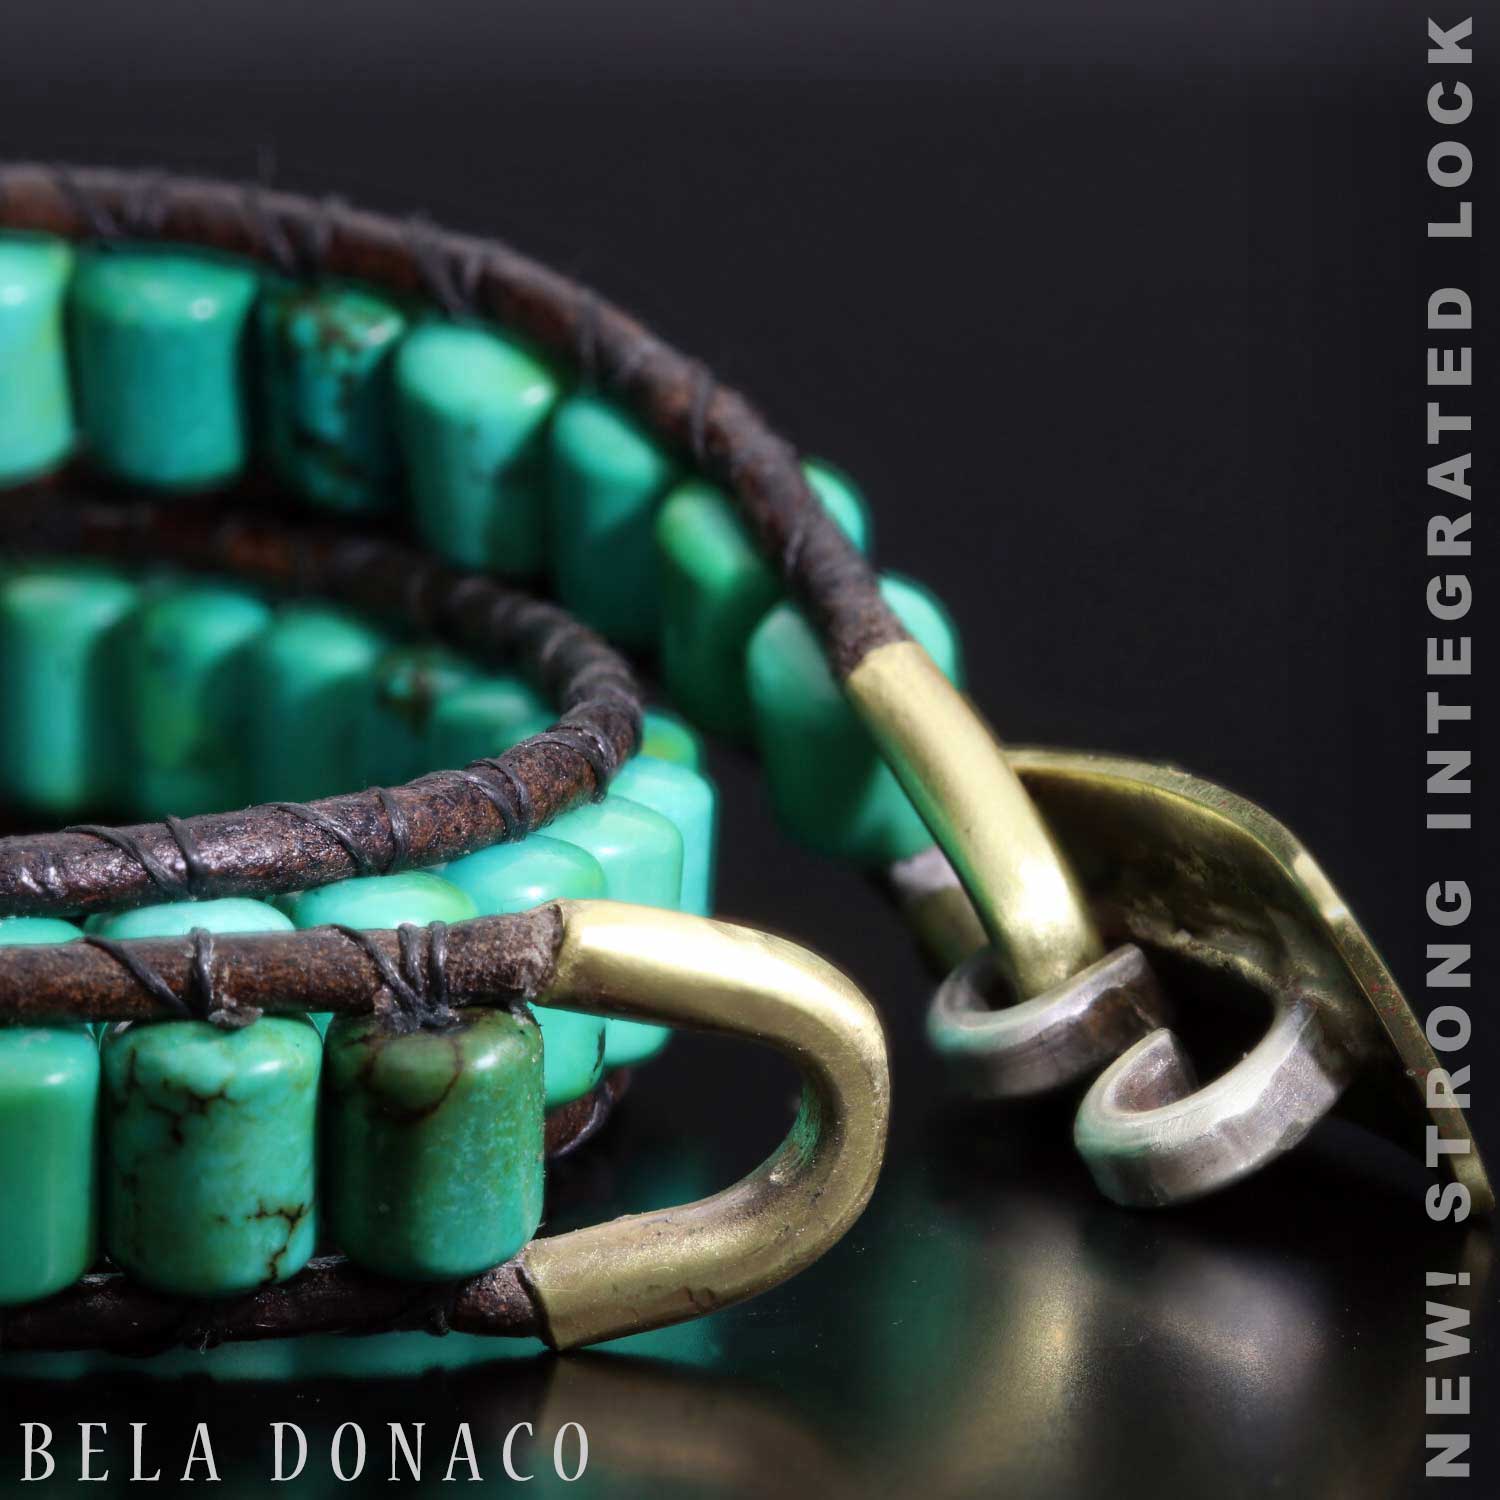 Turquoise brass combination4